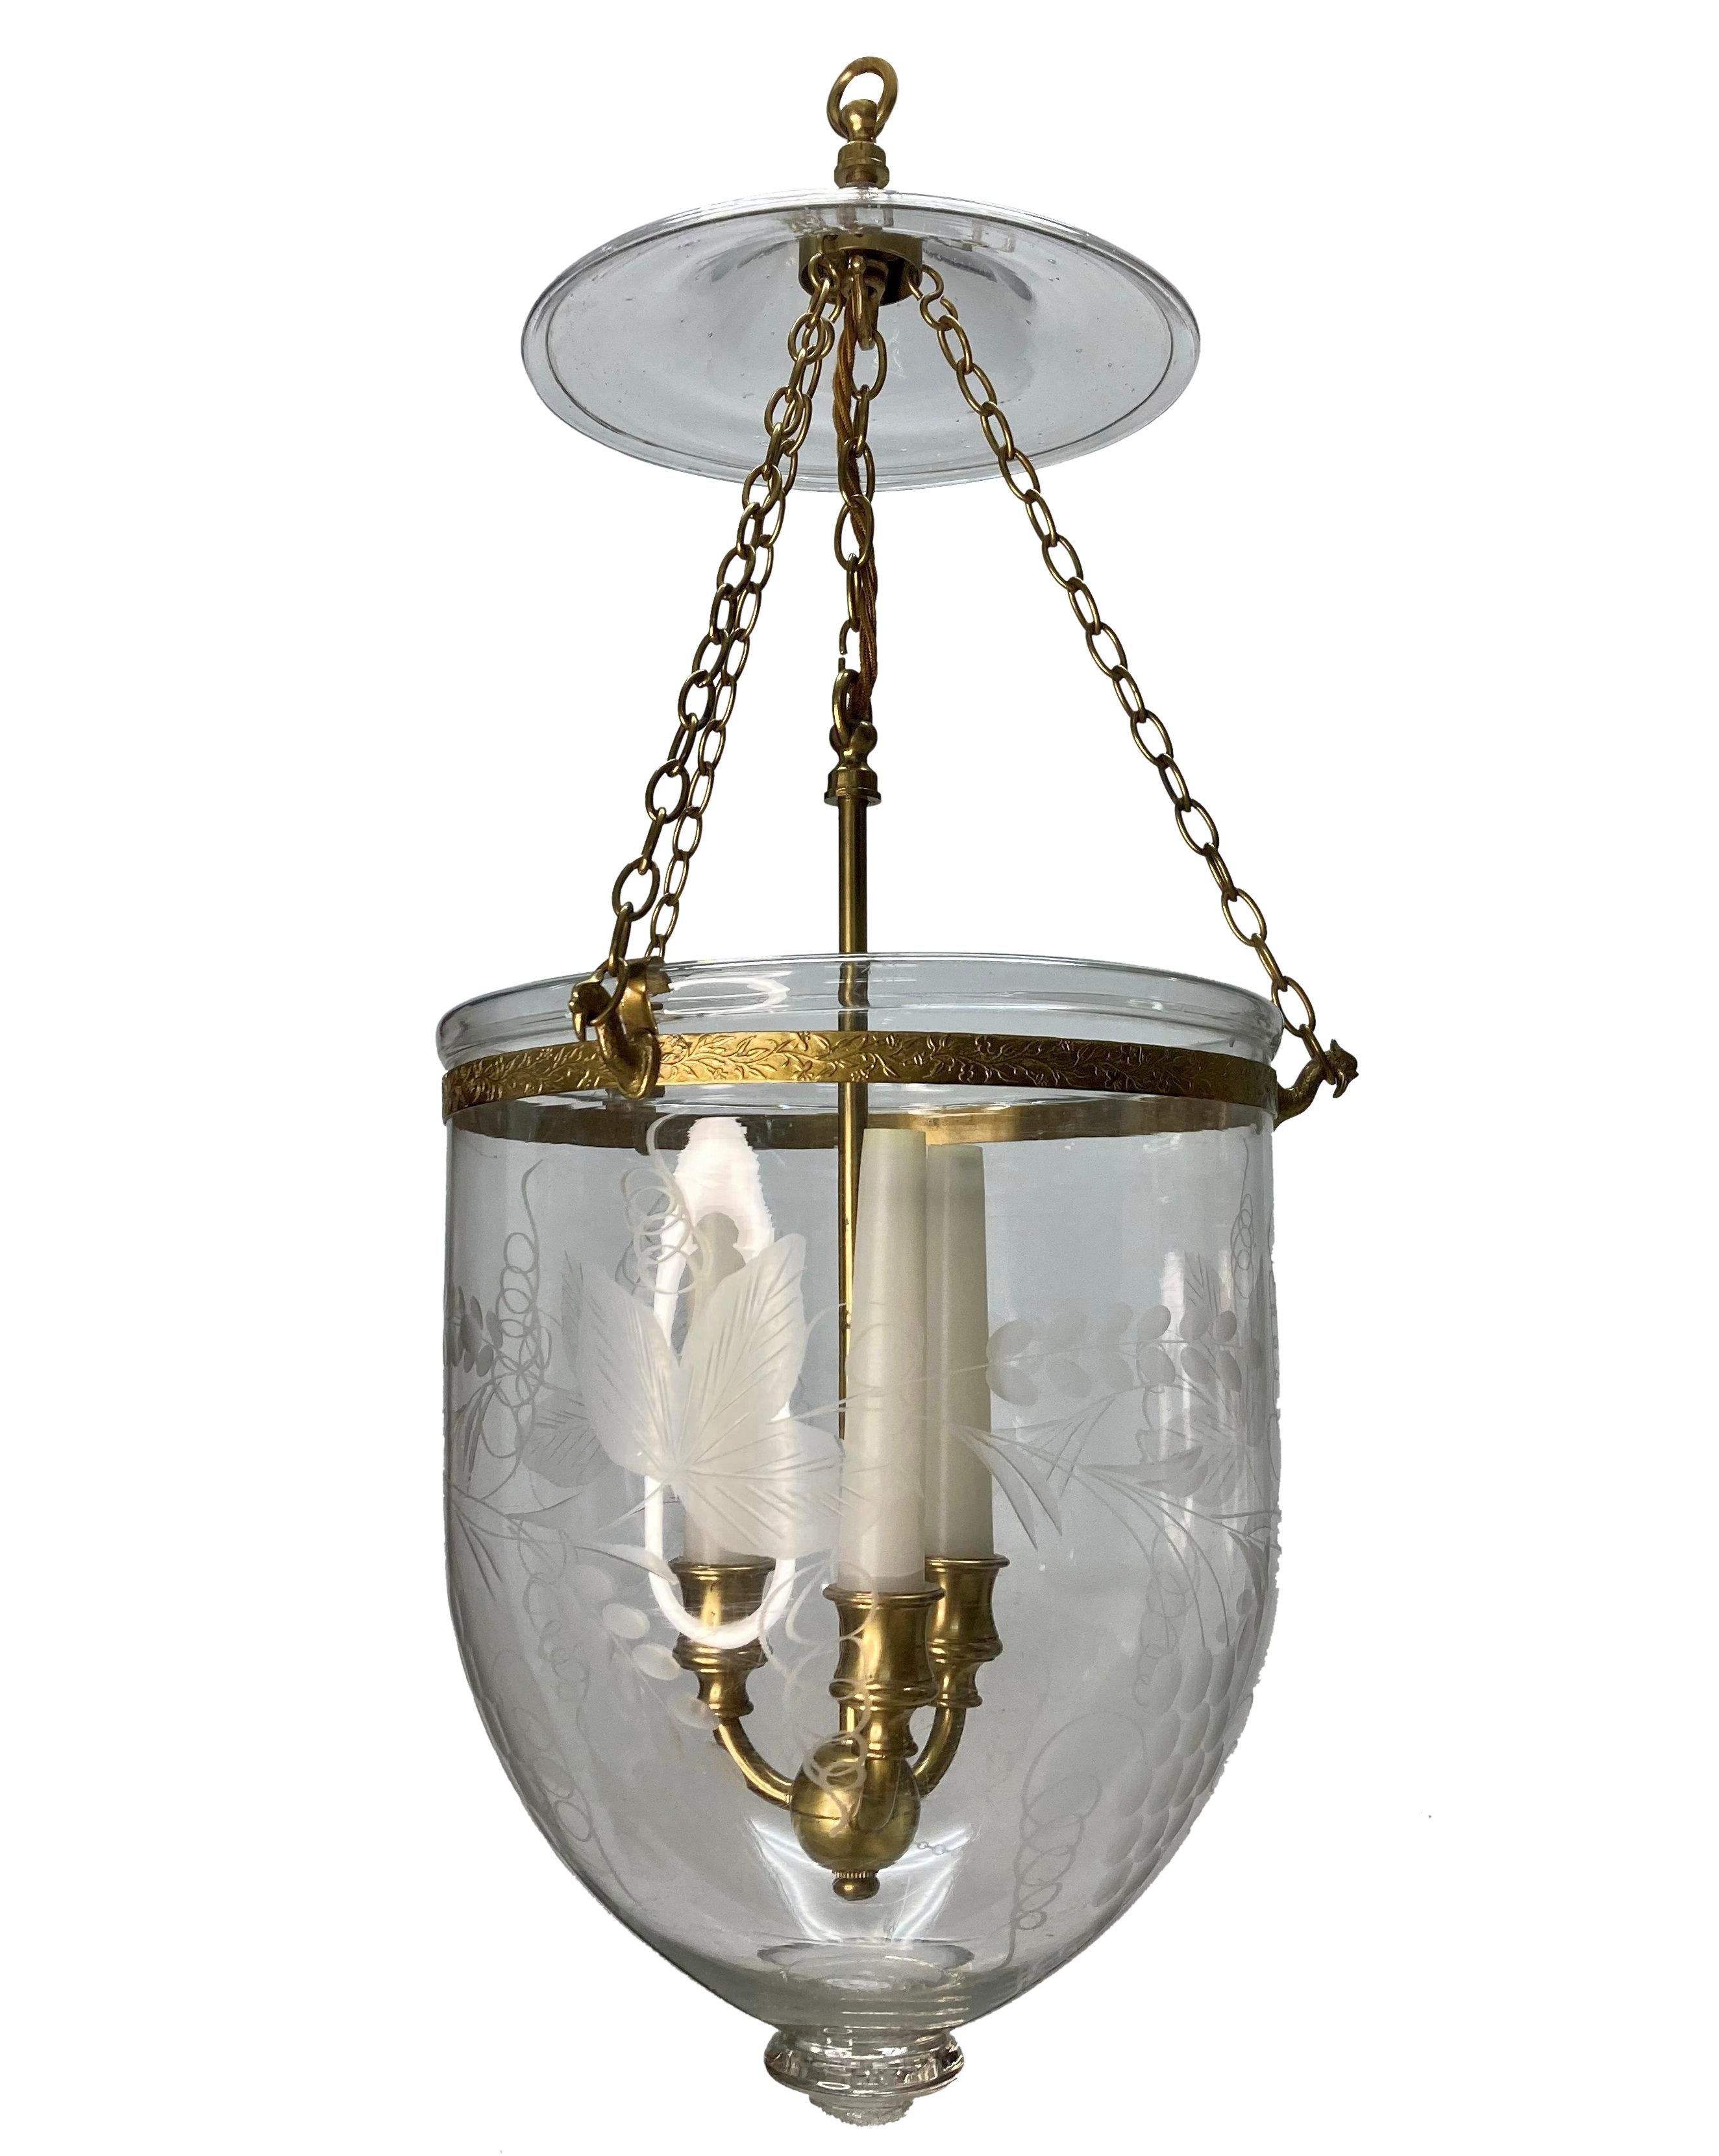 English Bell Lantern With Brass Fittings & Grape Vine Design For Sale 1